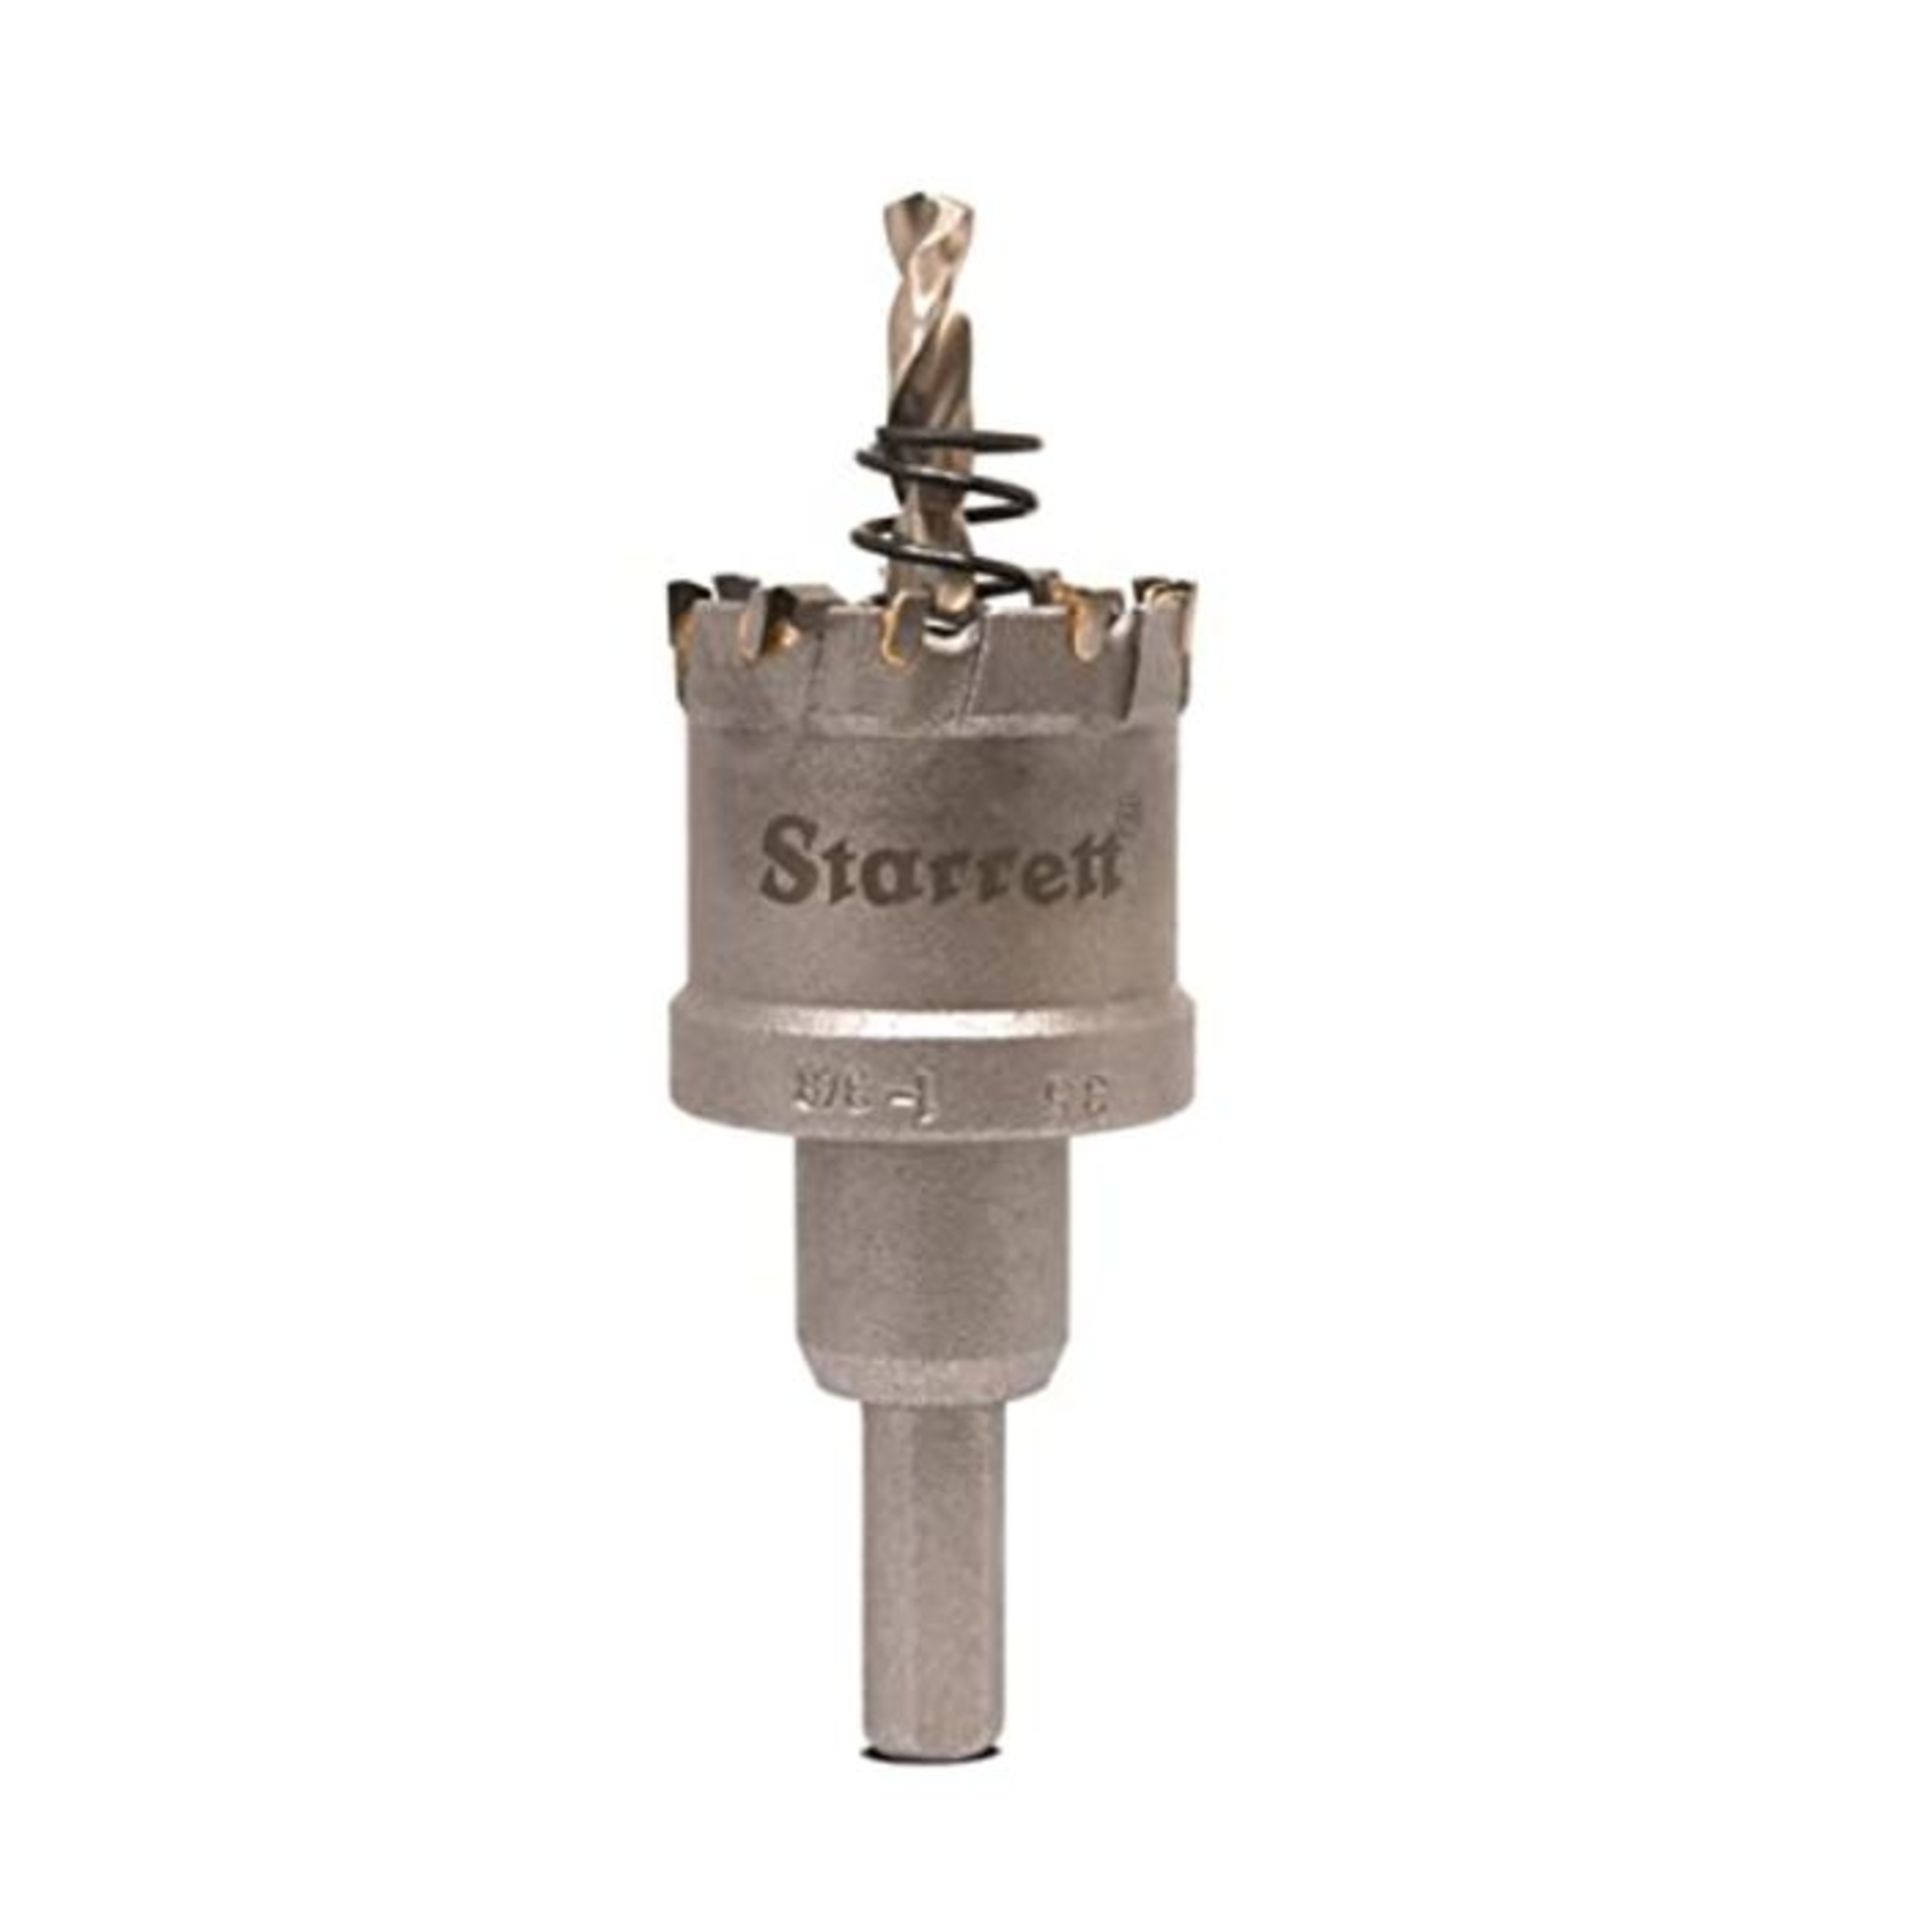 Starrett Carbide Tipped Hole Saw - CTD35 TCT Deep Cut Holesaw Cutter - For Metal Stain - Image 4 of 5